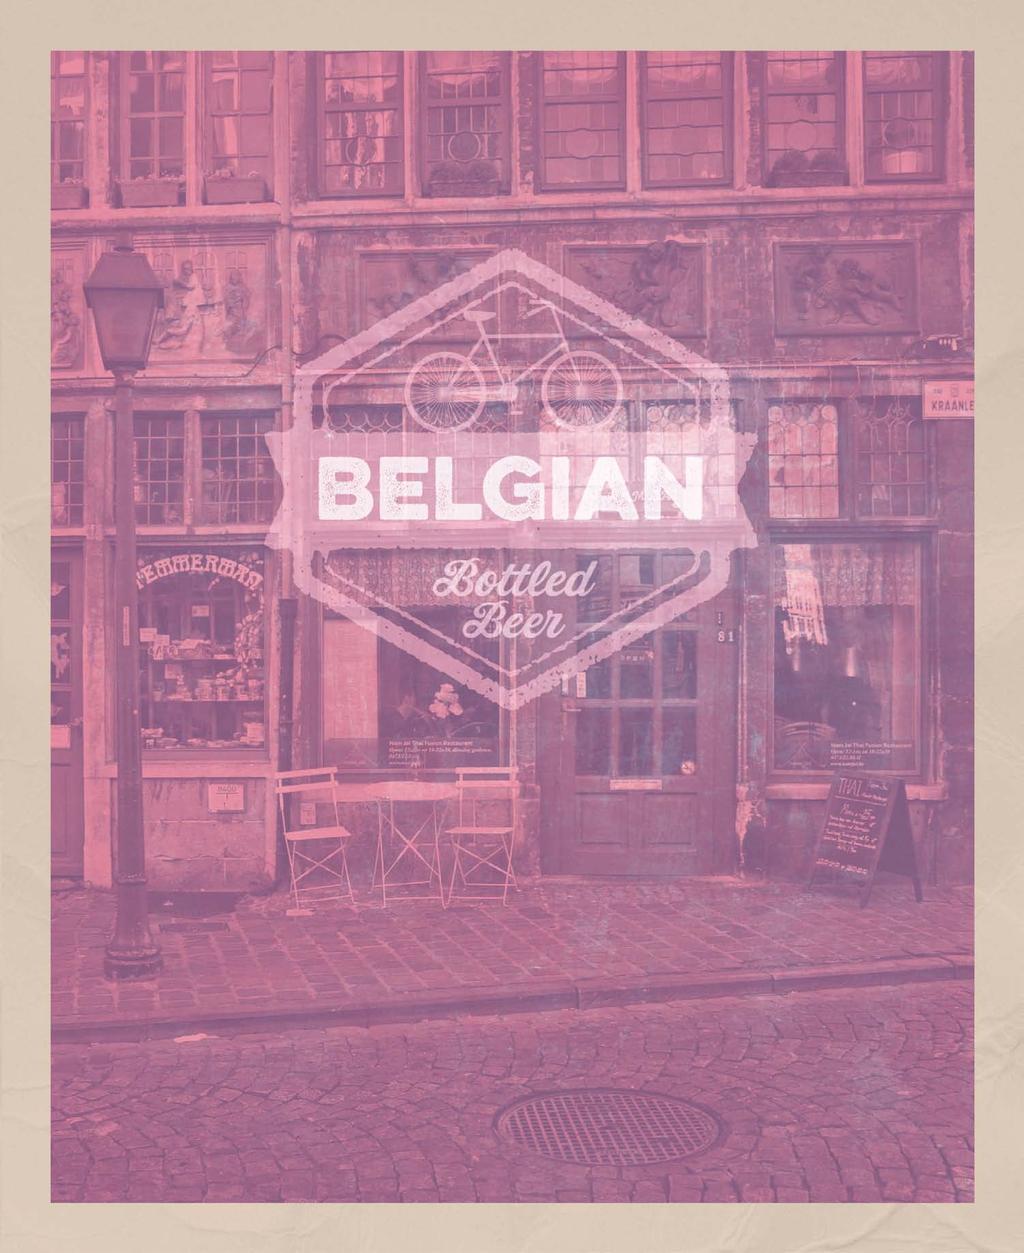 Brewing has been at the heart of Belgium life for centuries and forms a vibrant cornerstone of the country s culture.